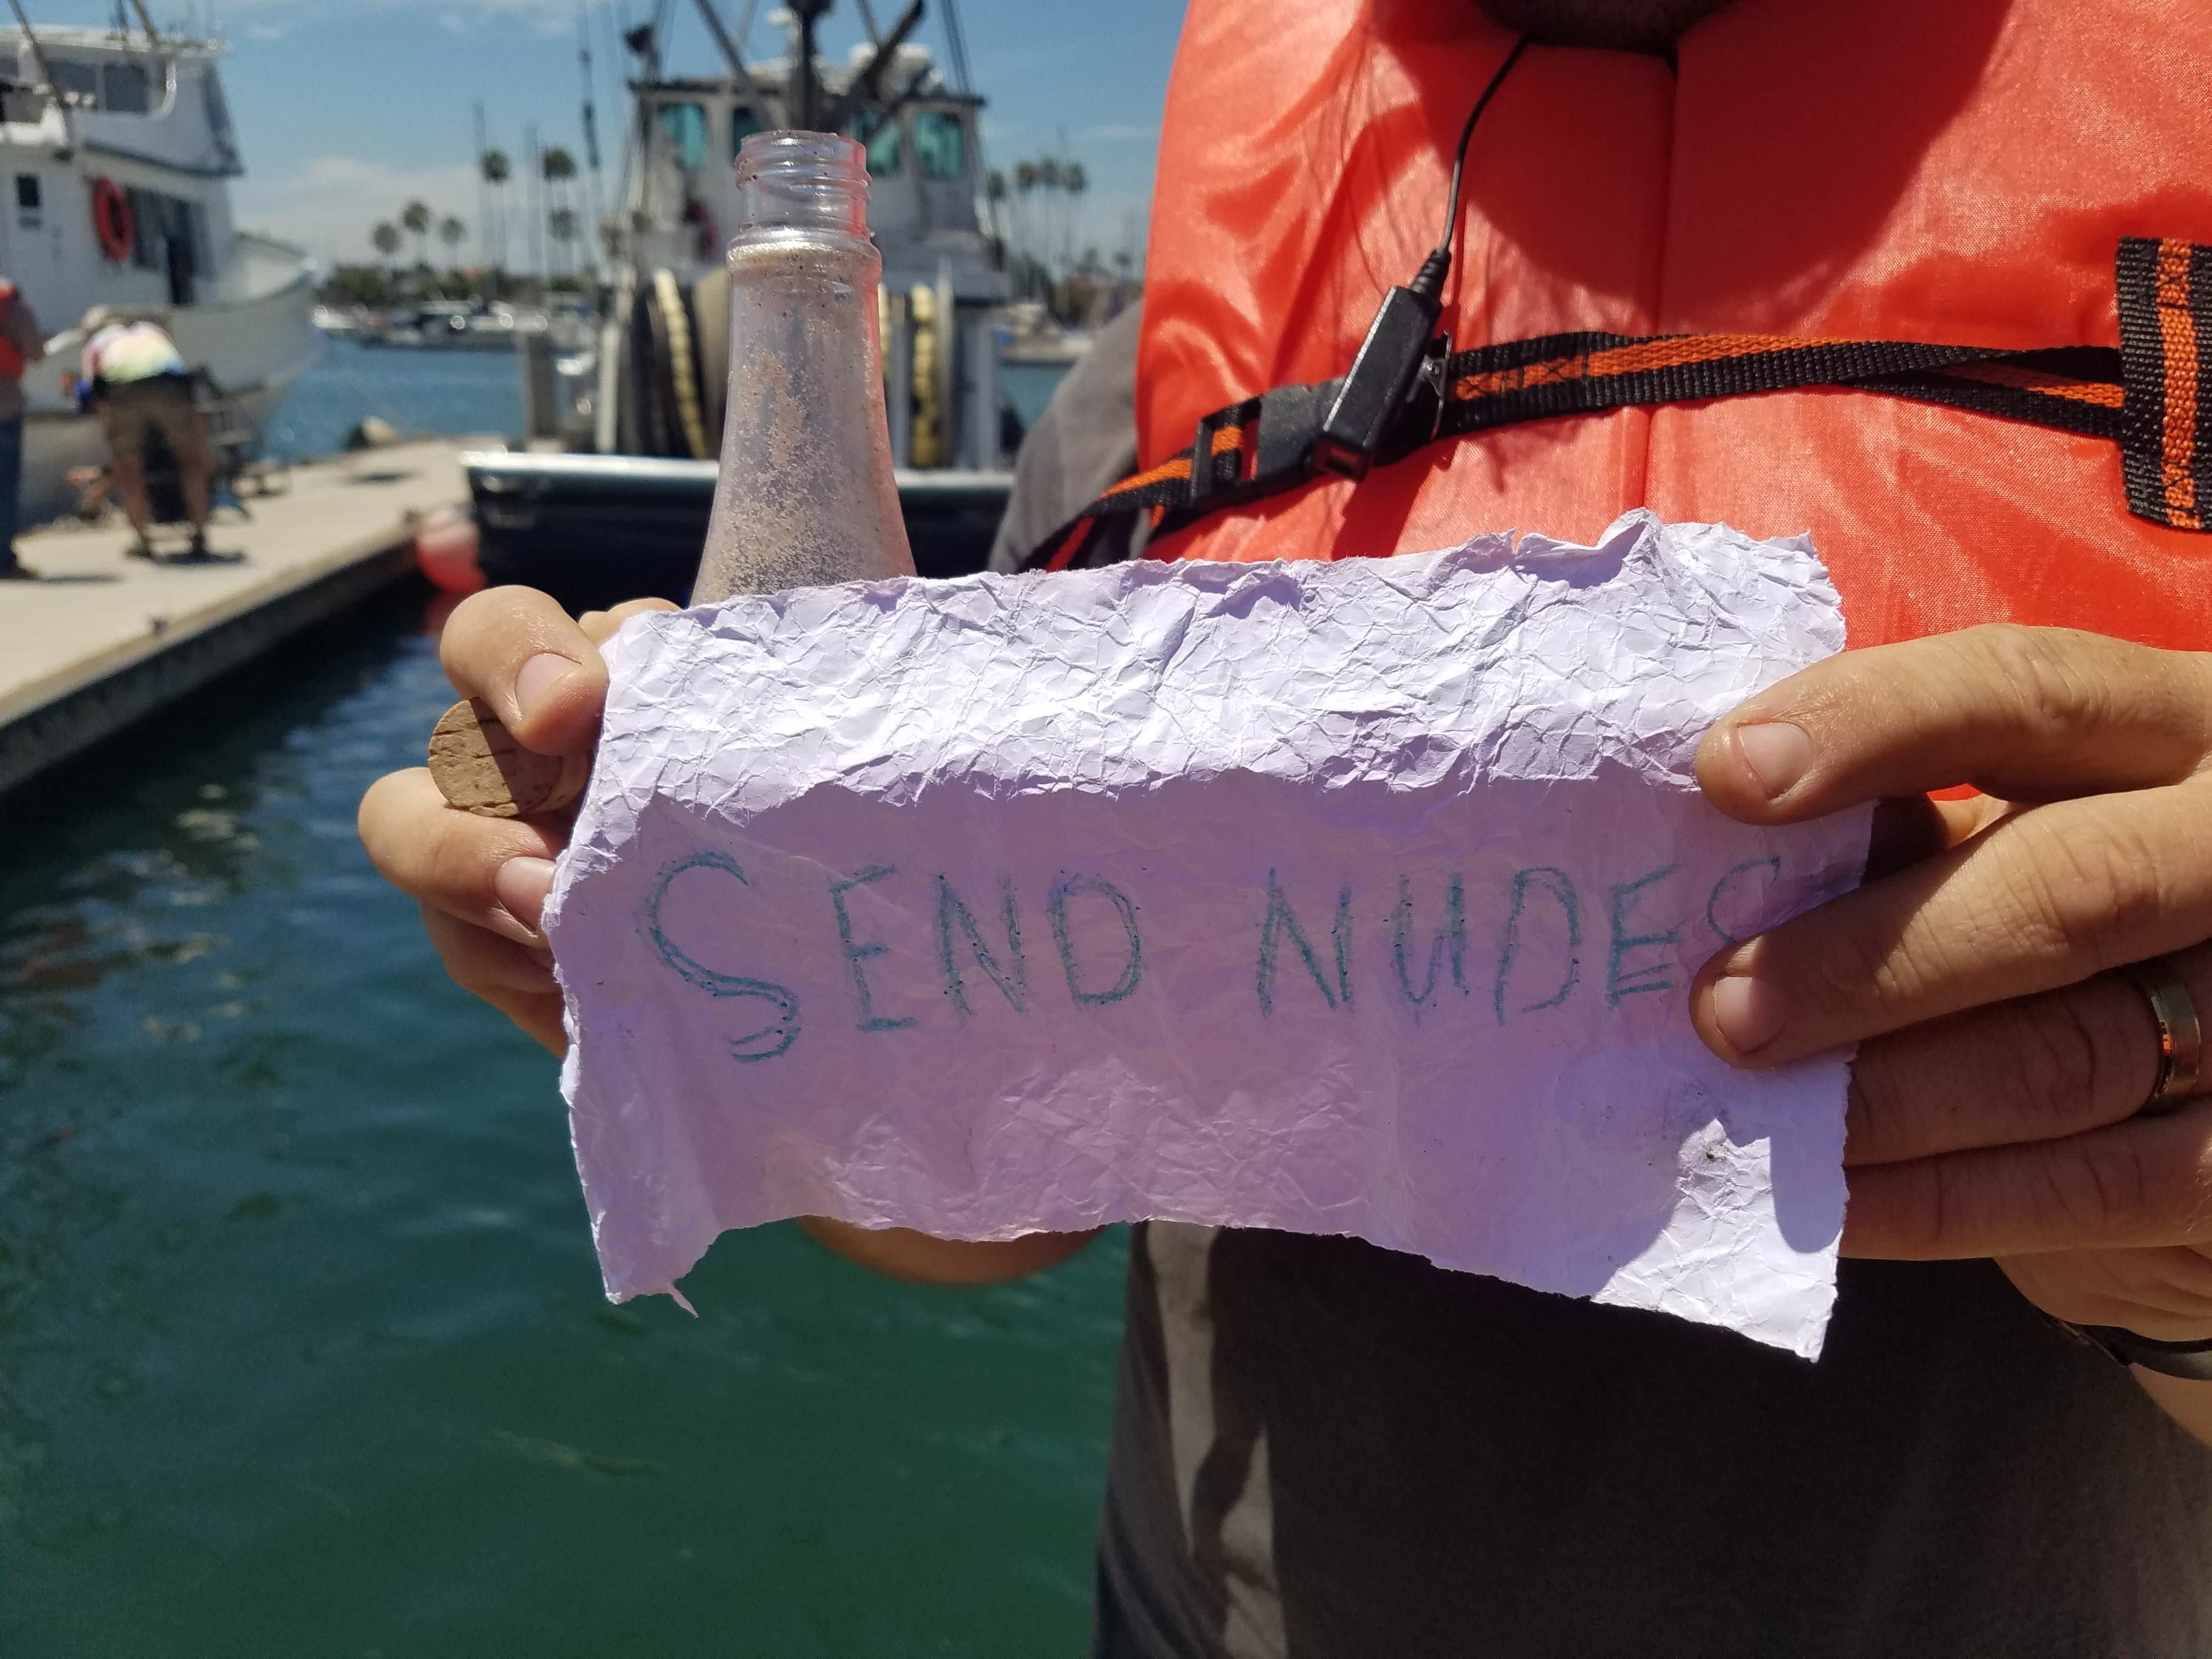 Found a Real message in a bottle at the marina today..